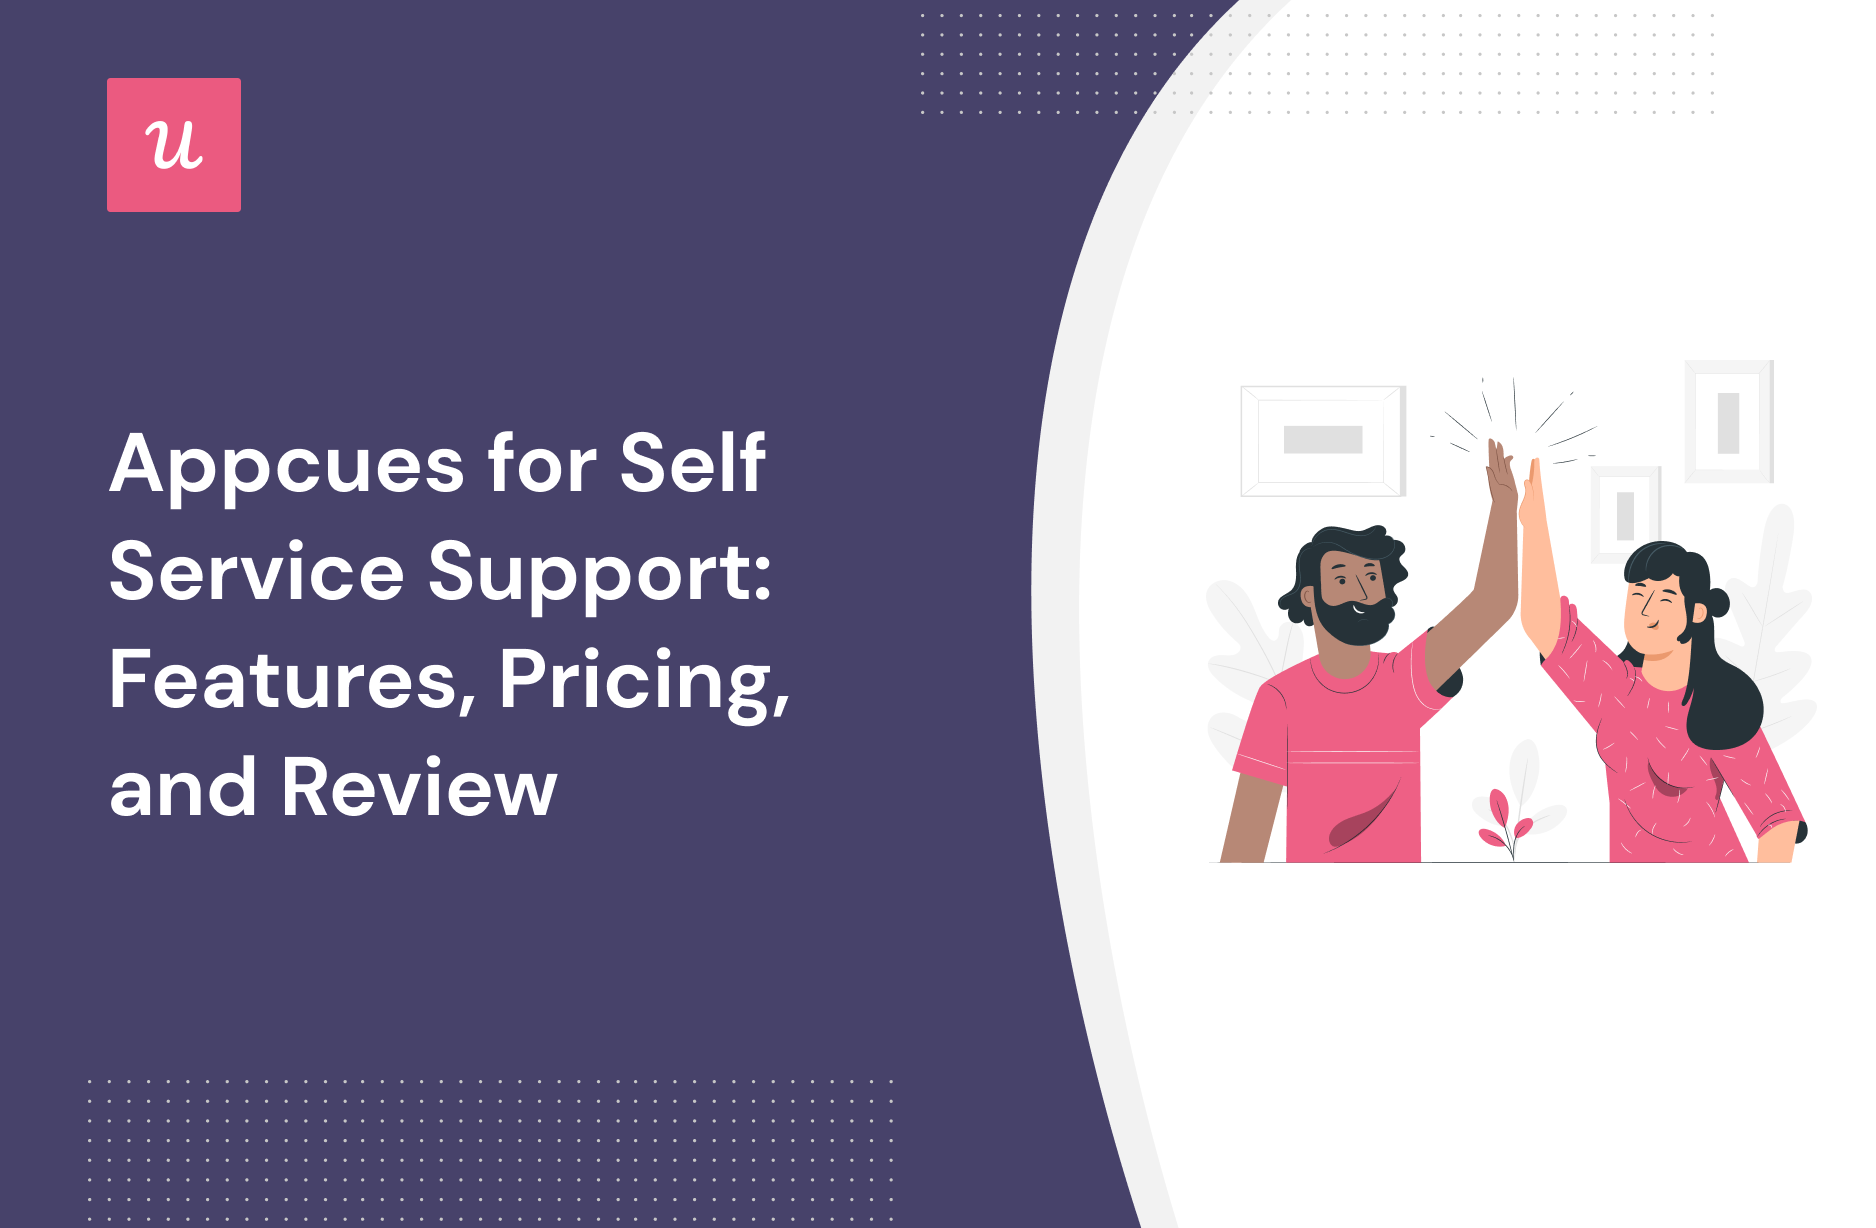 Appcues for Self Service Support: Features, Pricing, and Review